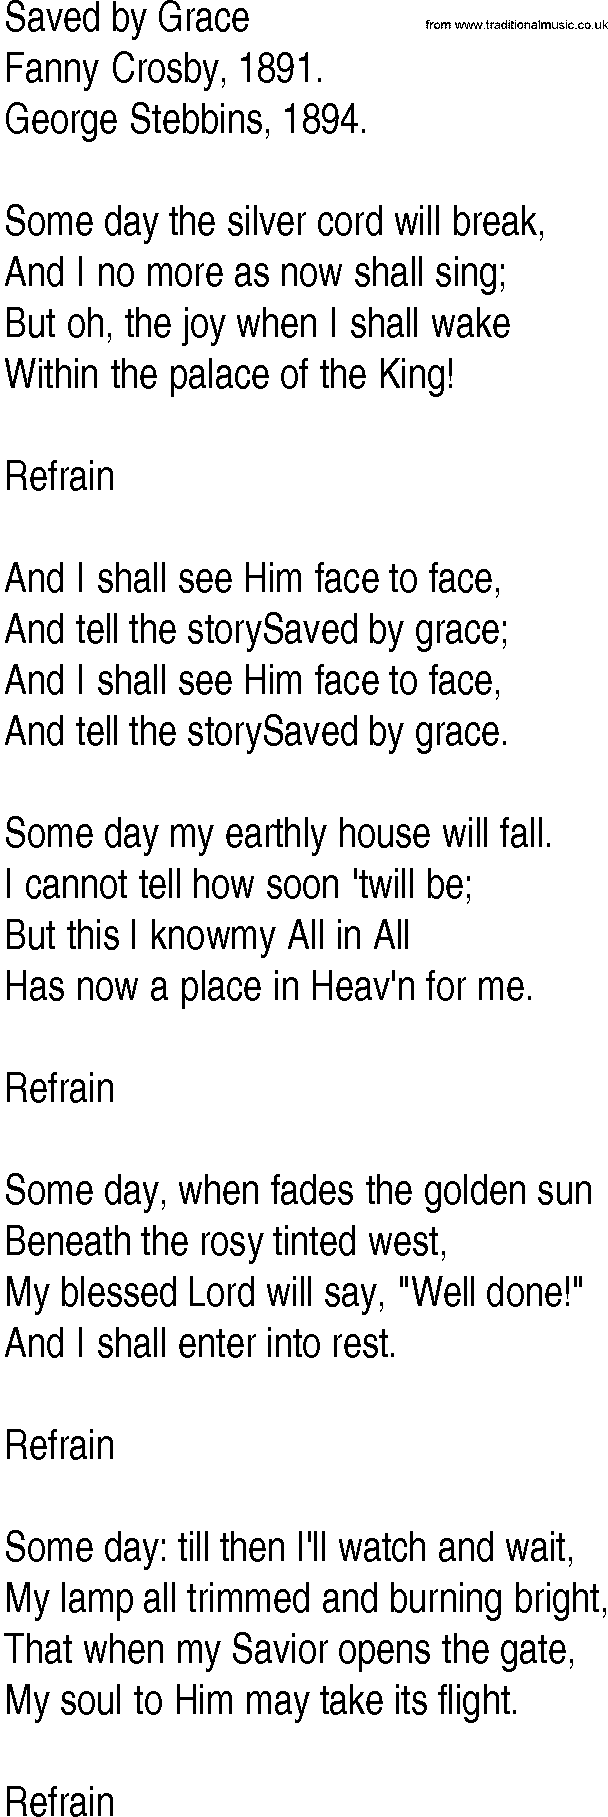 Hymn and Gospel Song: Saved by Grace by Fanny Crosby lyrics